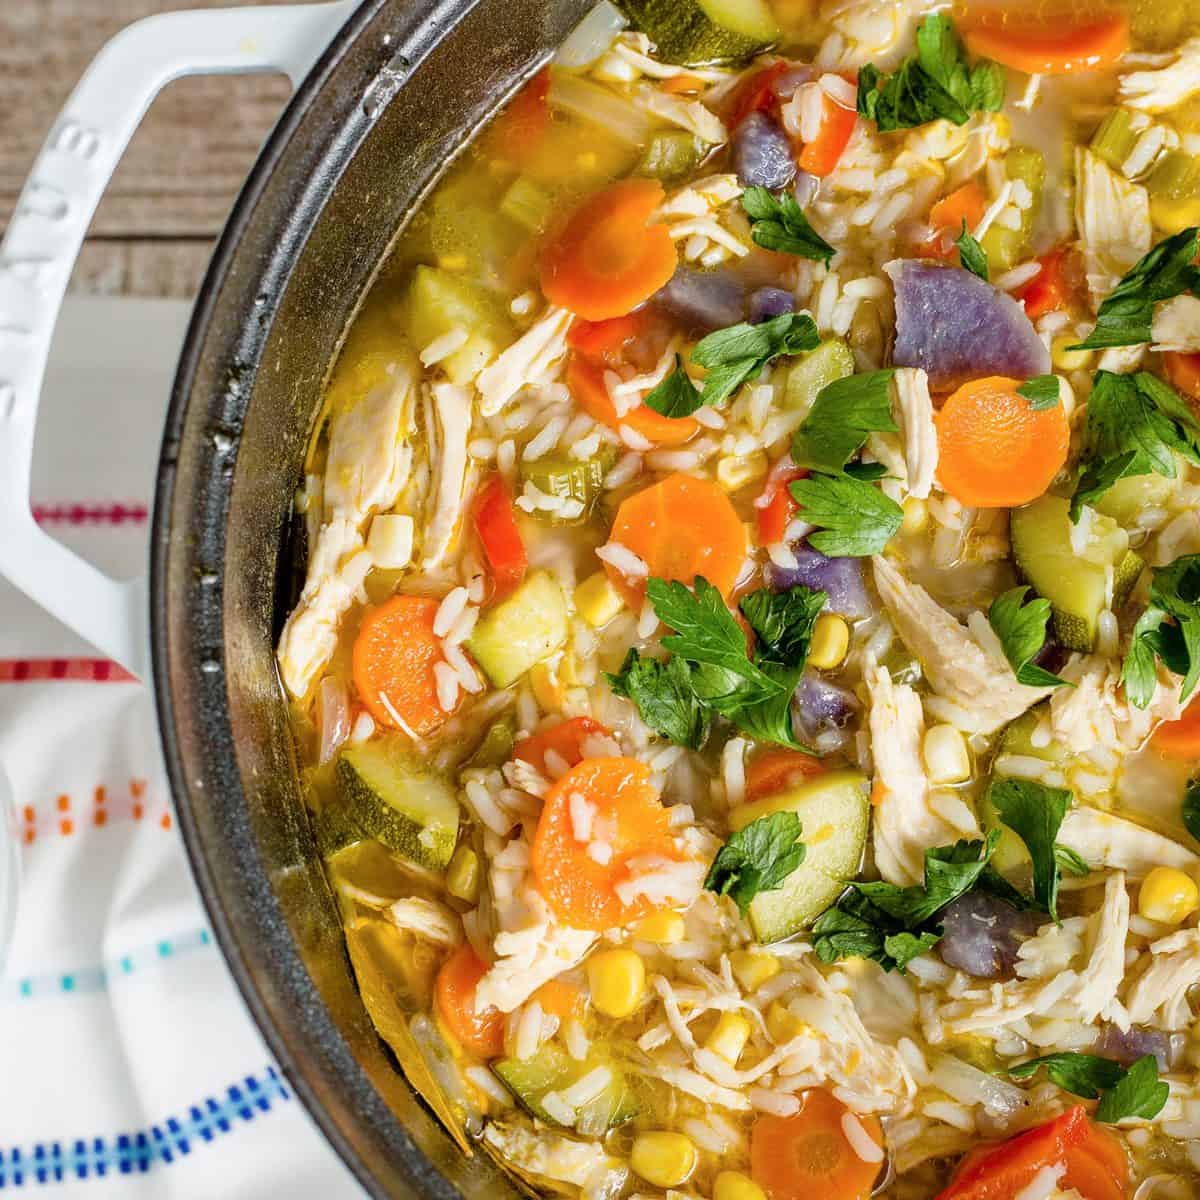 https://www.thecountrycook.net/wp-content/uploads/2021/10/thumbnail-Harvest-Chicken-and-Rice-Soup-scaled.jpg